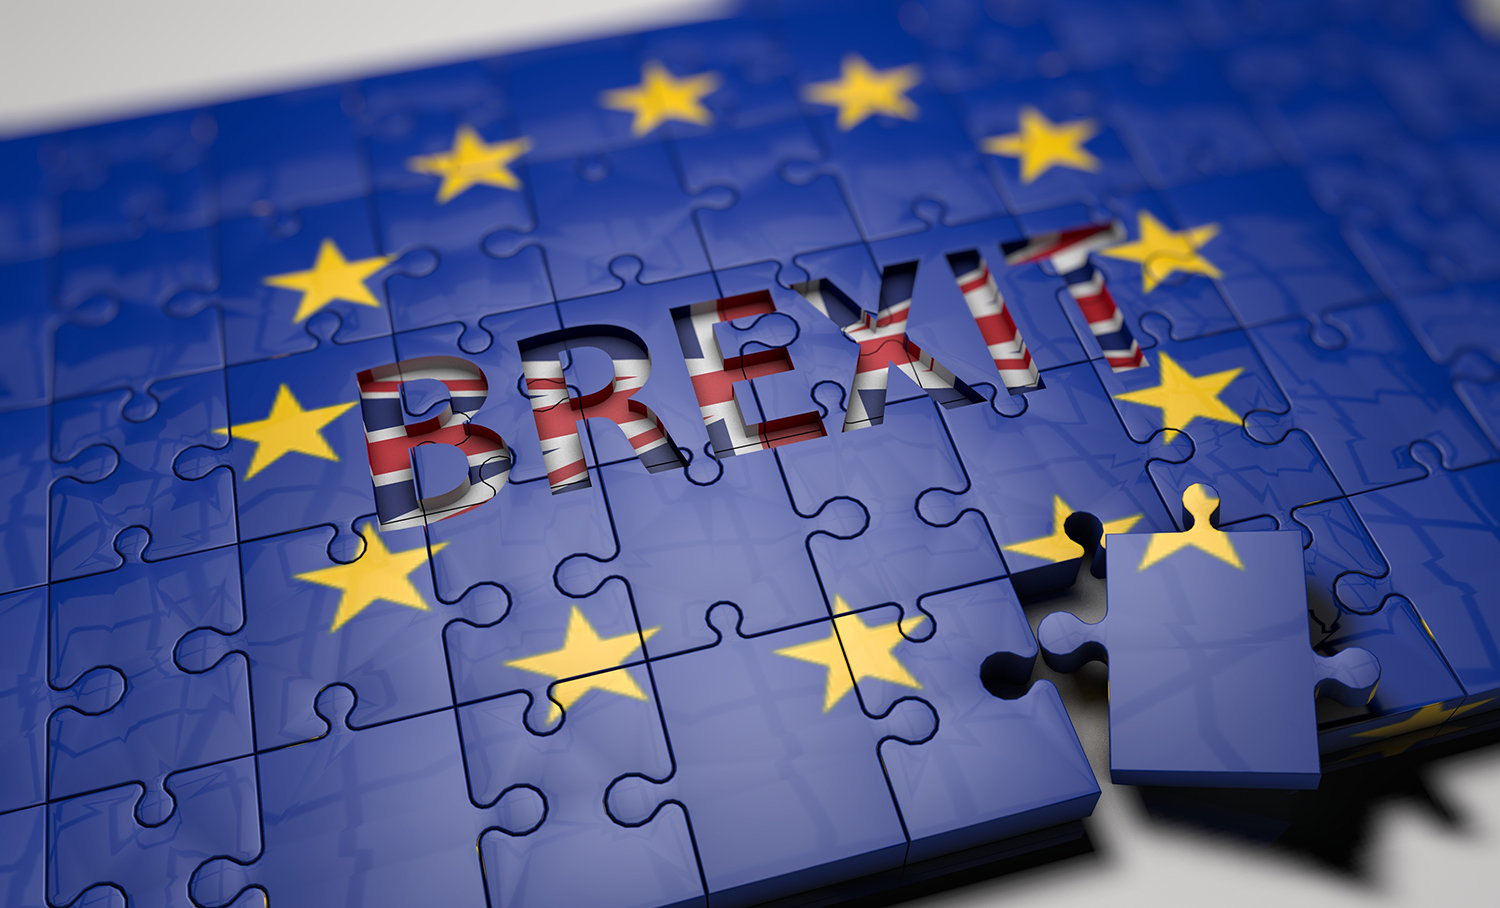 New research challenges prevailing Brexit narrative and offers policy recommendations for the North